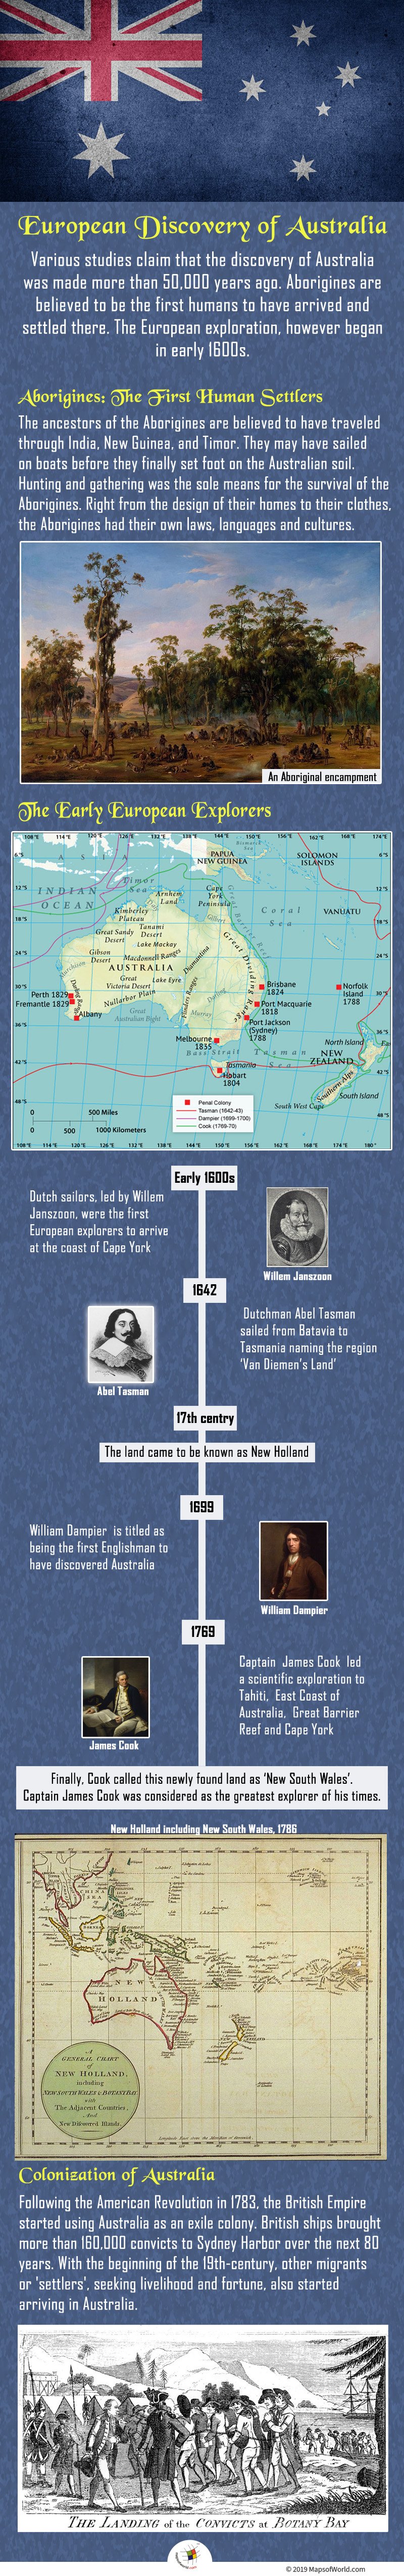 Infographic Giving Details on the European Discovery of Australia